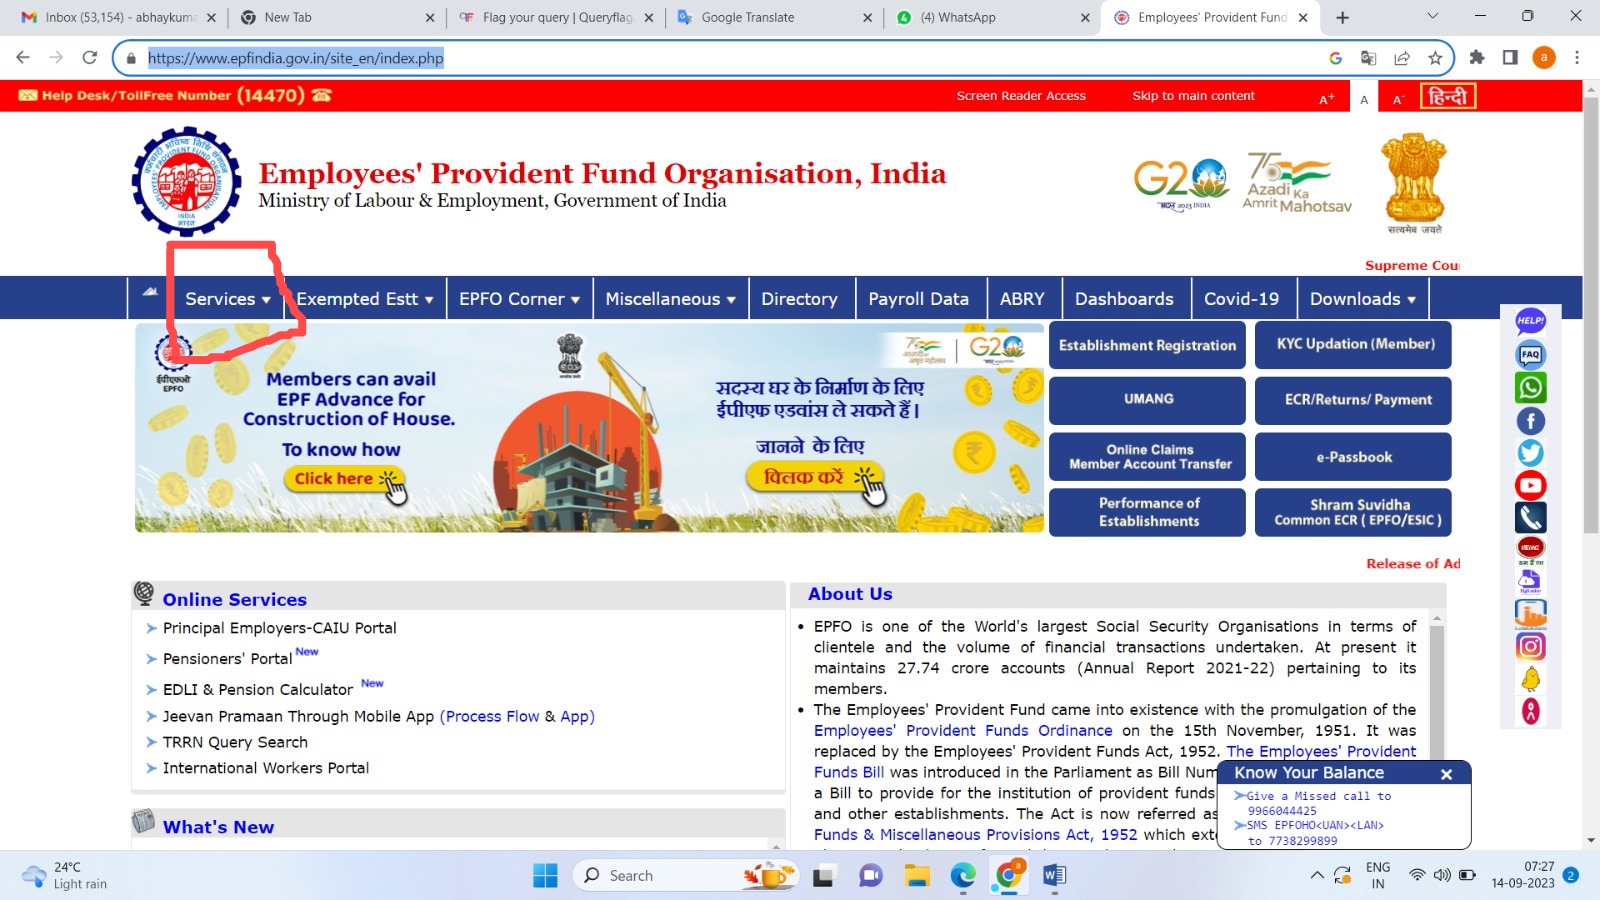 Visit EPFO web site and Go to Services Tab 